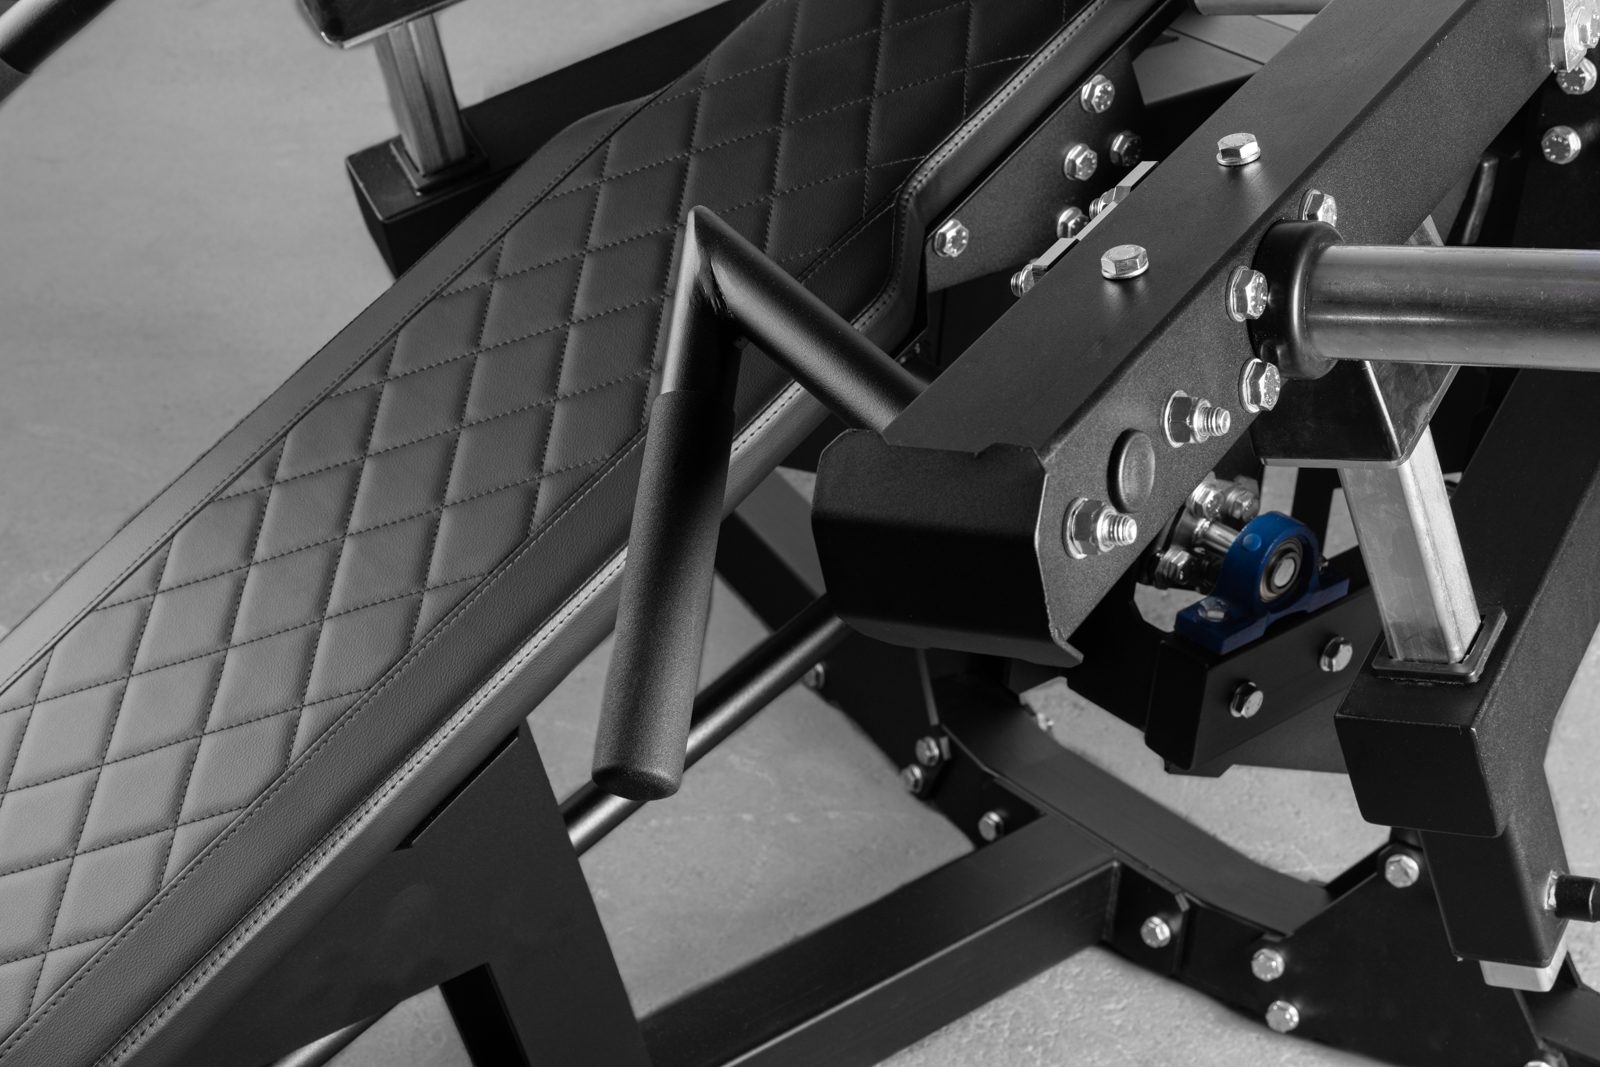 The Savage Prince Incline Chest Press | KingsBox